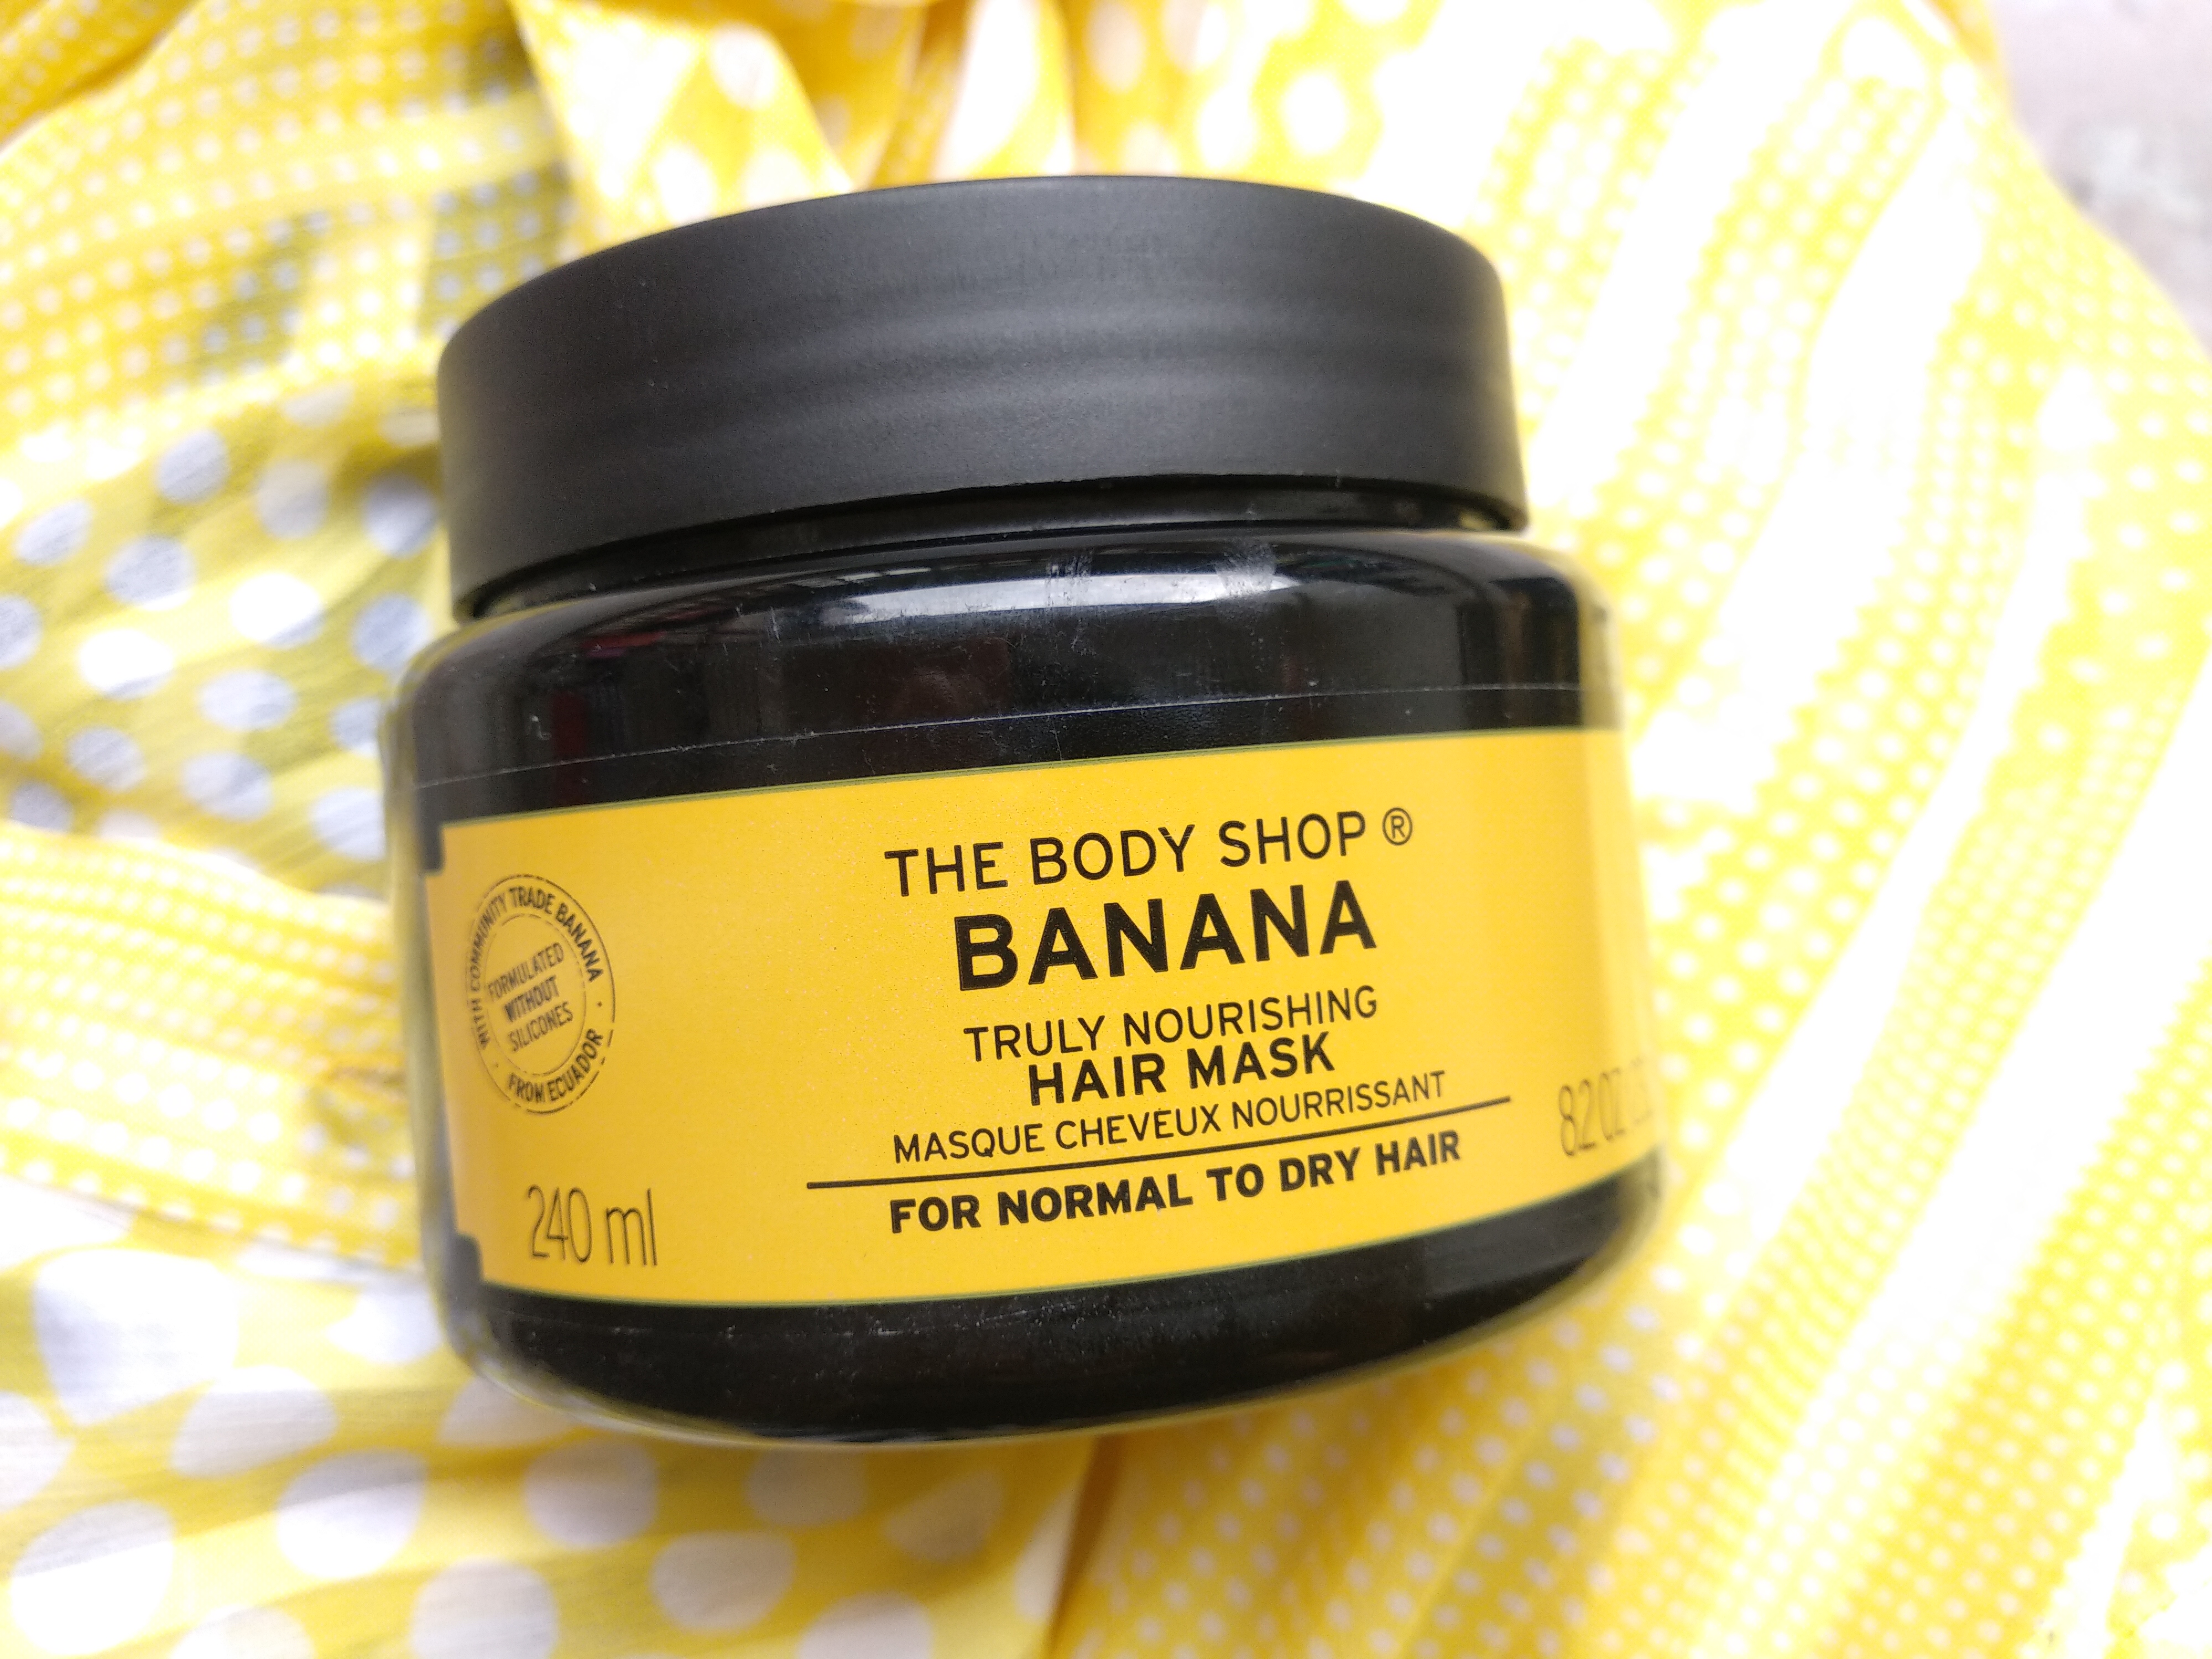 The Body Shop - Banana Truly Nourishing Hair Mask Review - Influsser